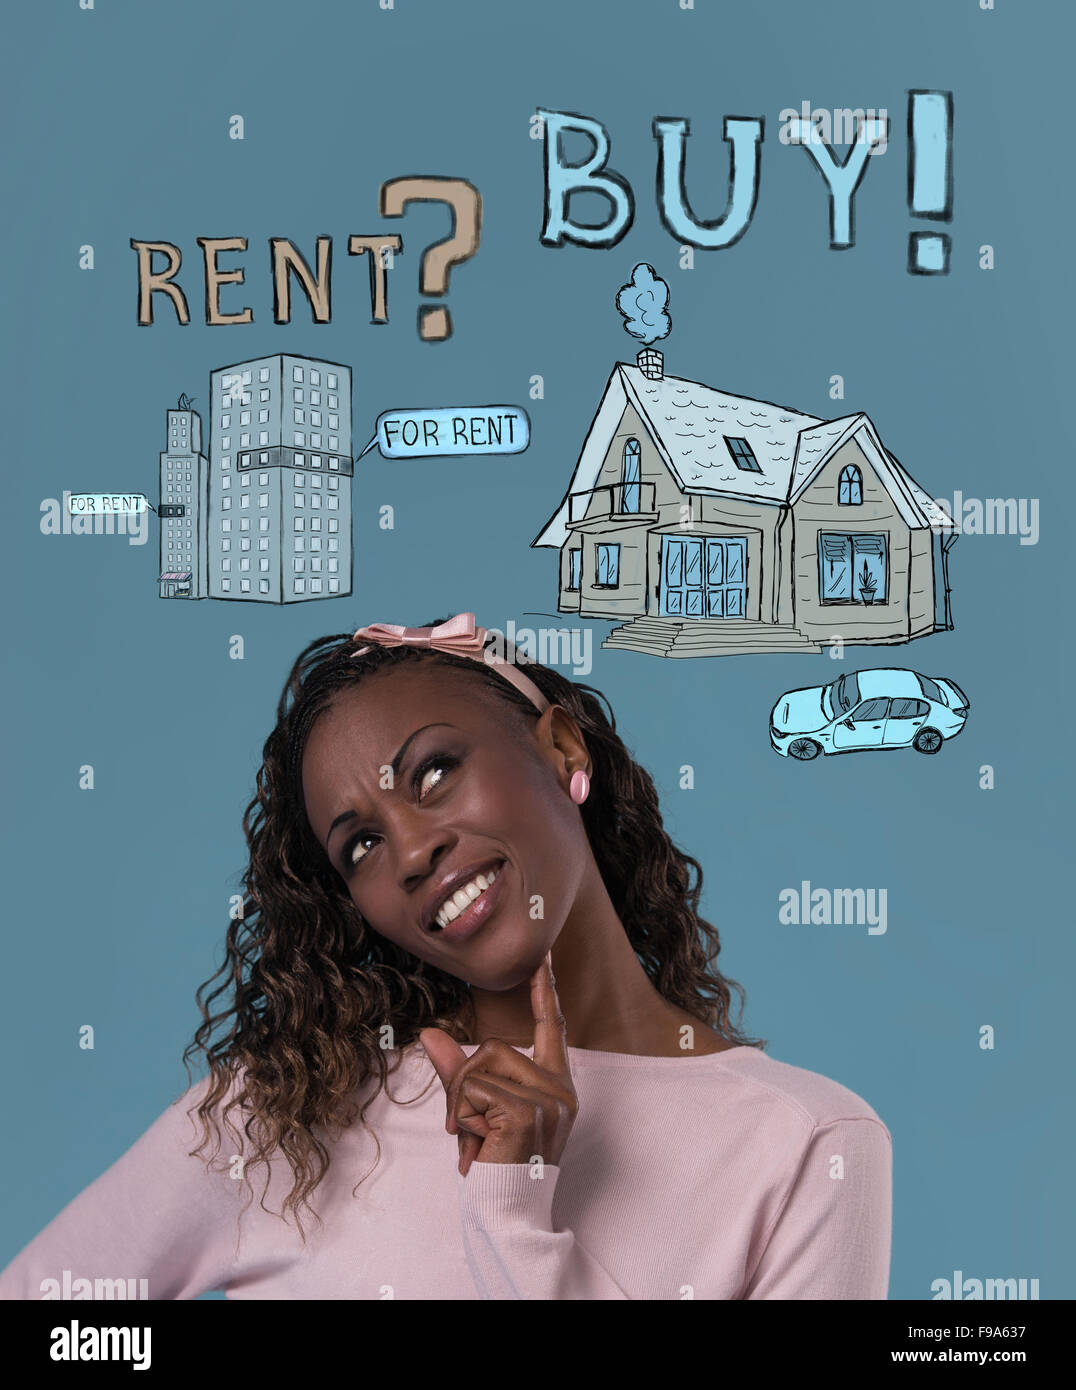 Buy or rent realty. Woman thinking and choosing, Mortgage concept Stock Photo